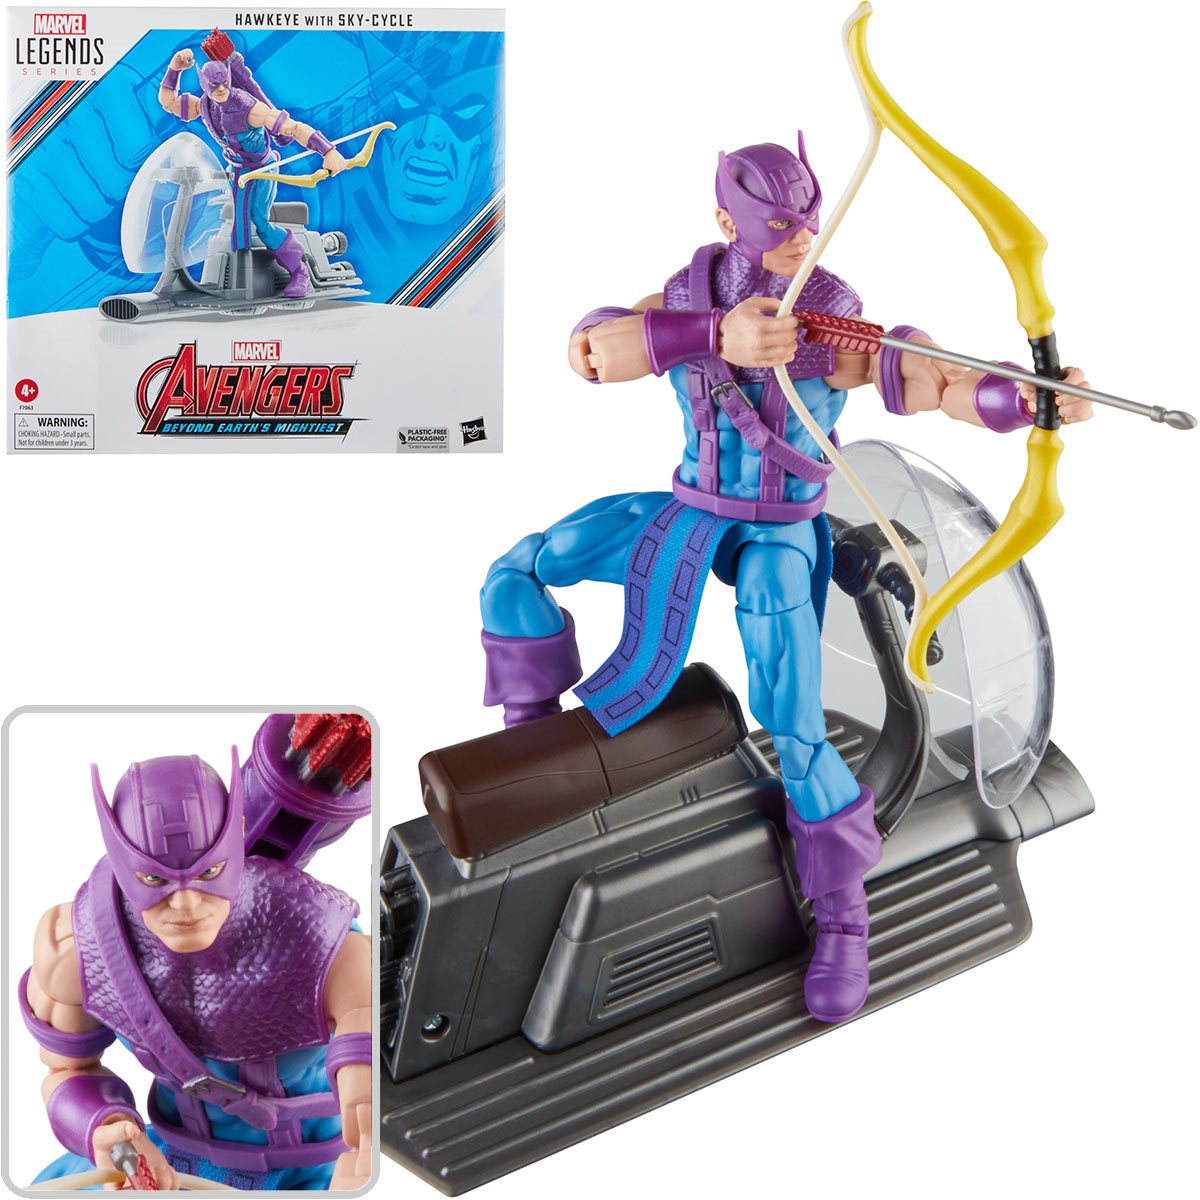 Avengers 60th Anniversary Marvel Legends Hawkeye with Sky-Cycle 6 Inch Action Figure